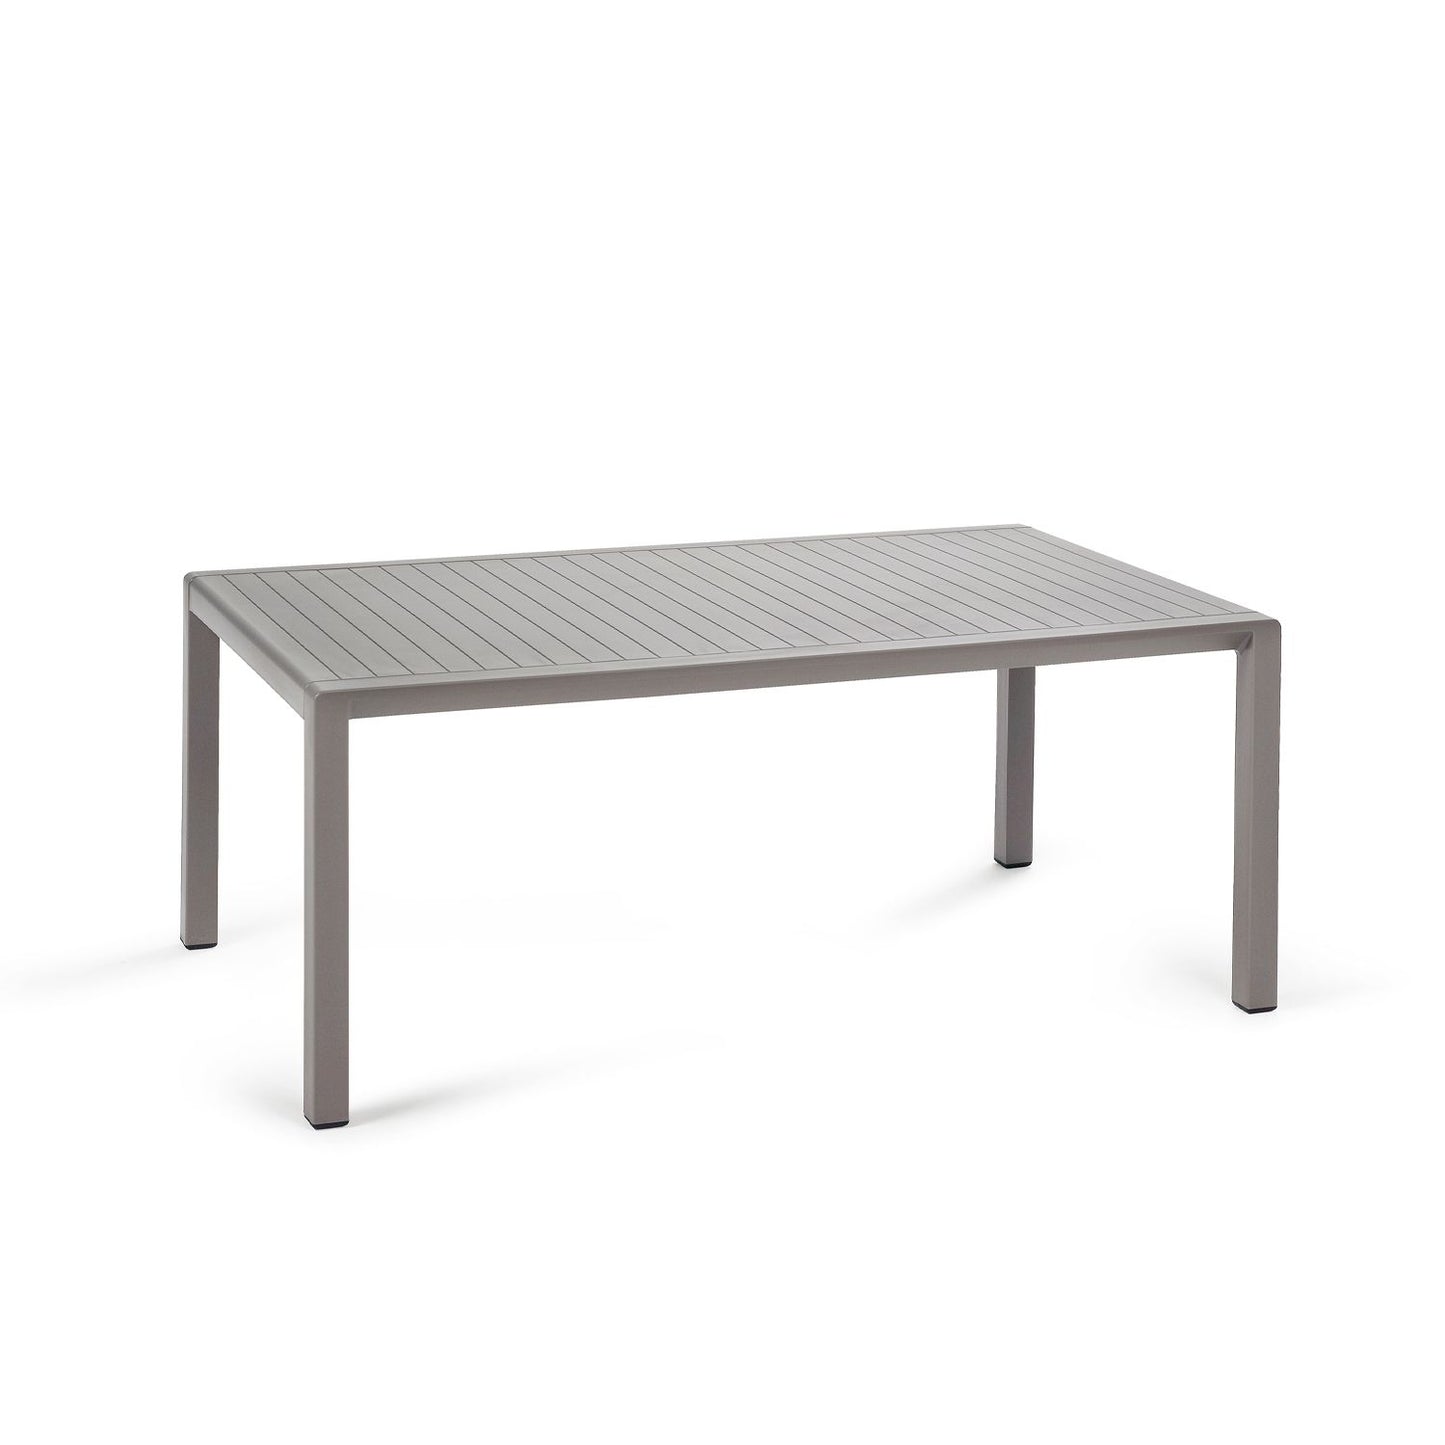 Aria 100cm Garden Table By Nardi - Taupe